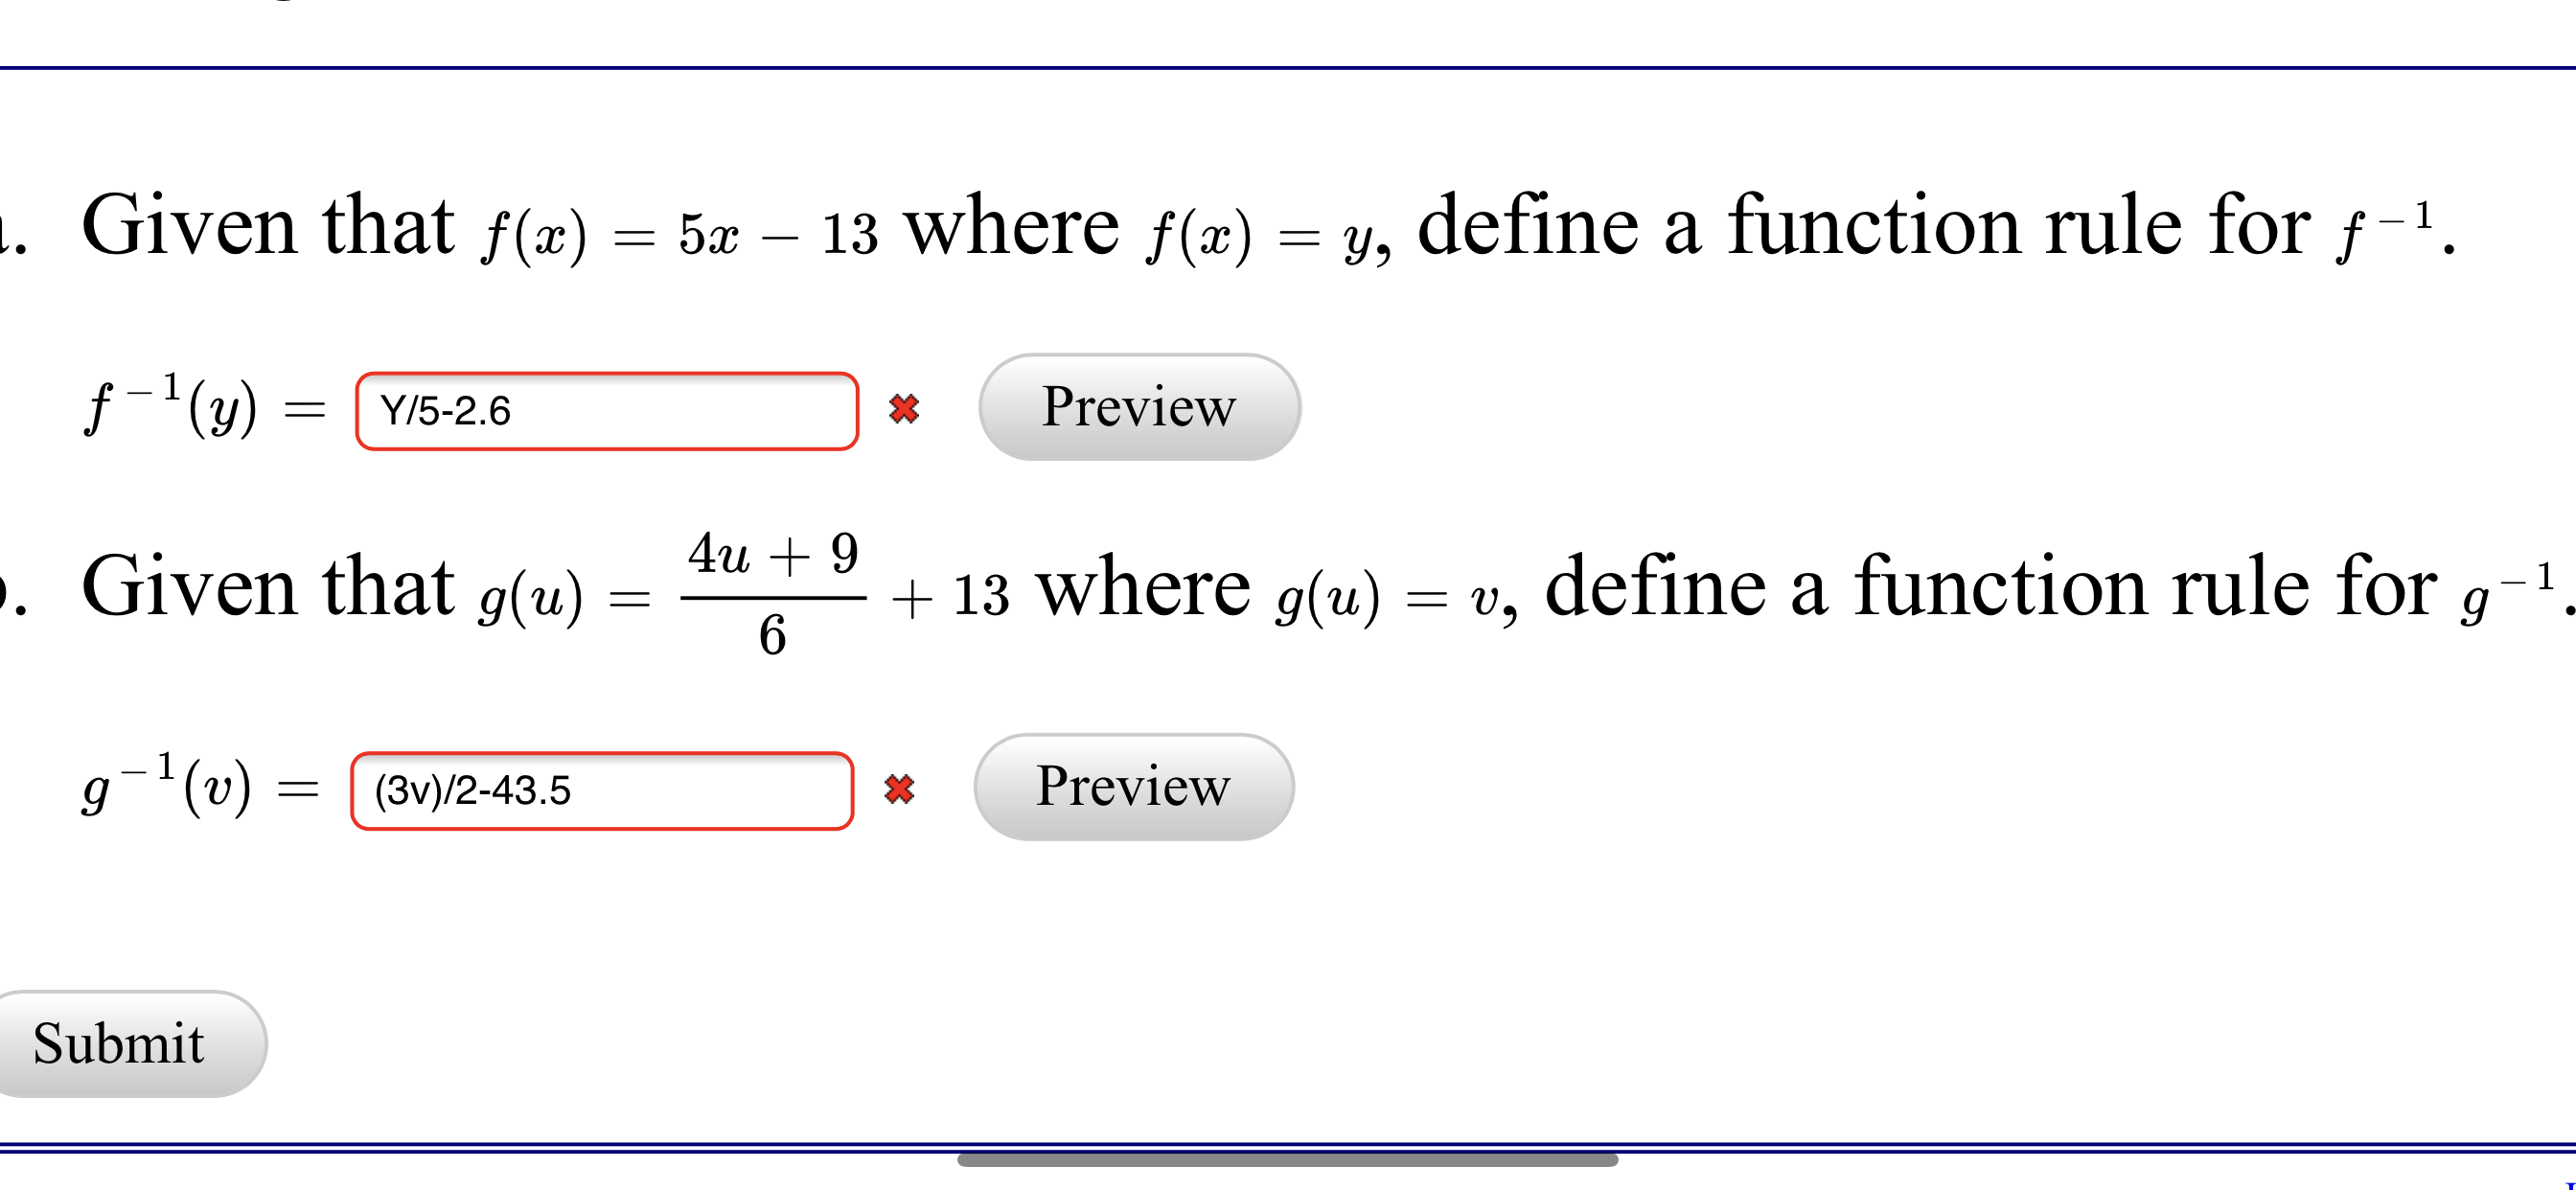 Given that f(x) = 5x – 13 where f(x) = y, define a function rule for f-1.
